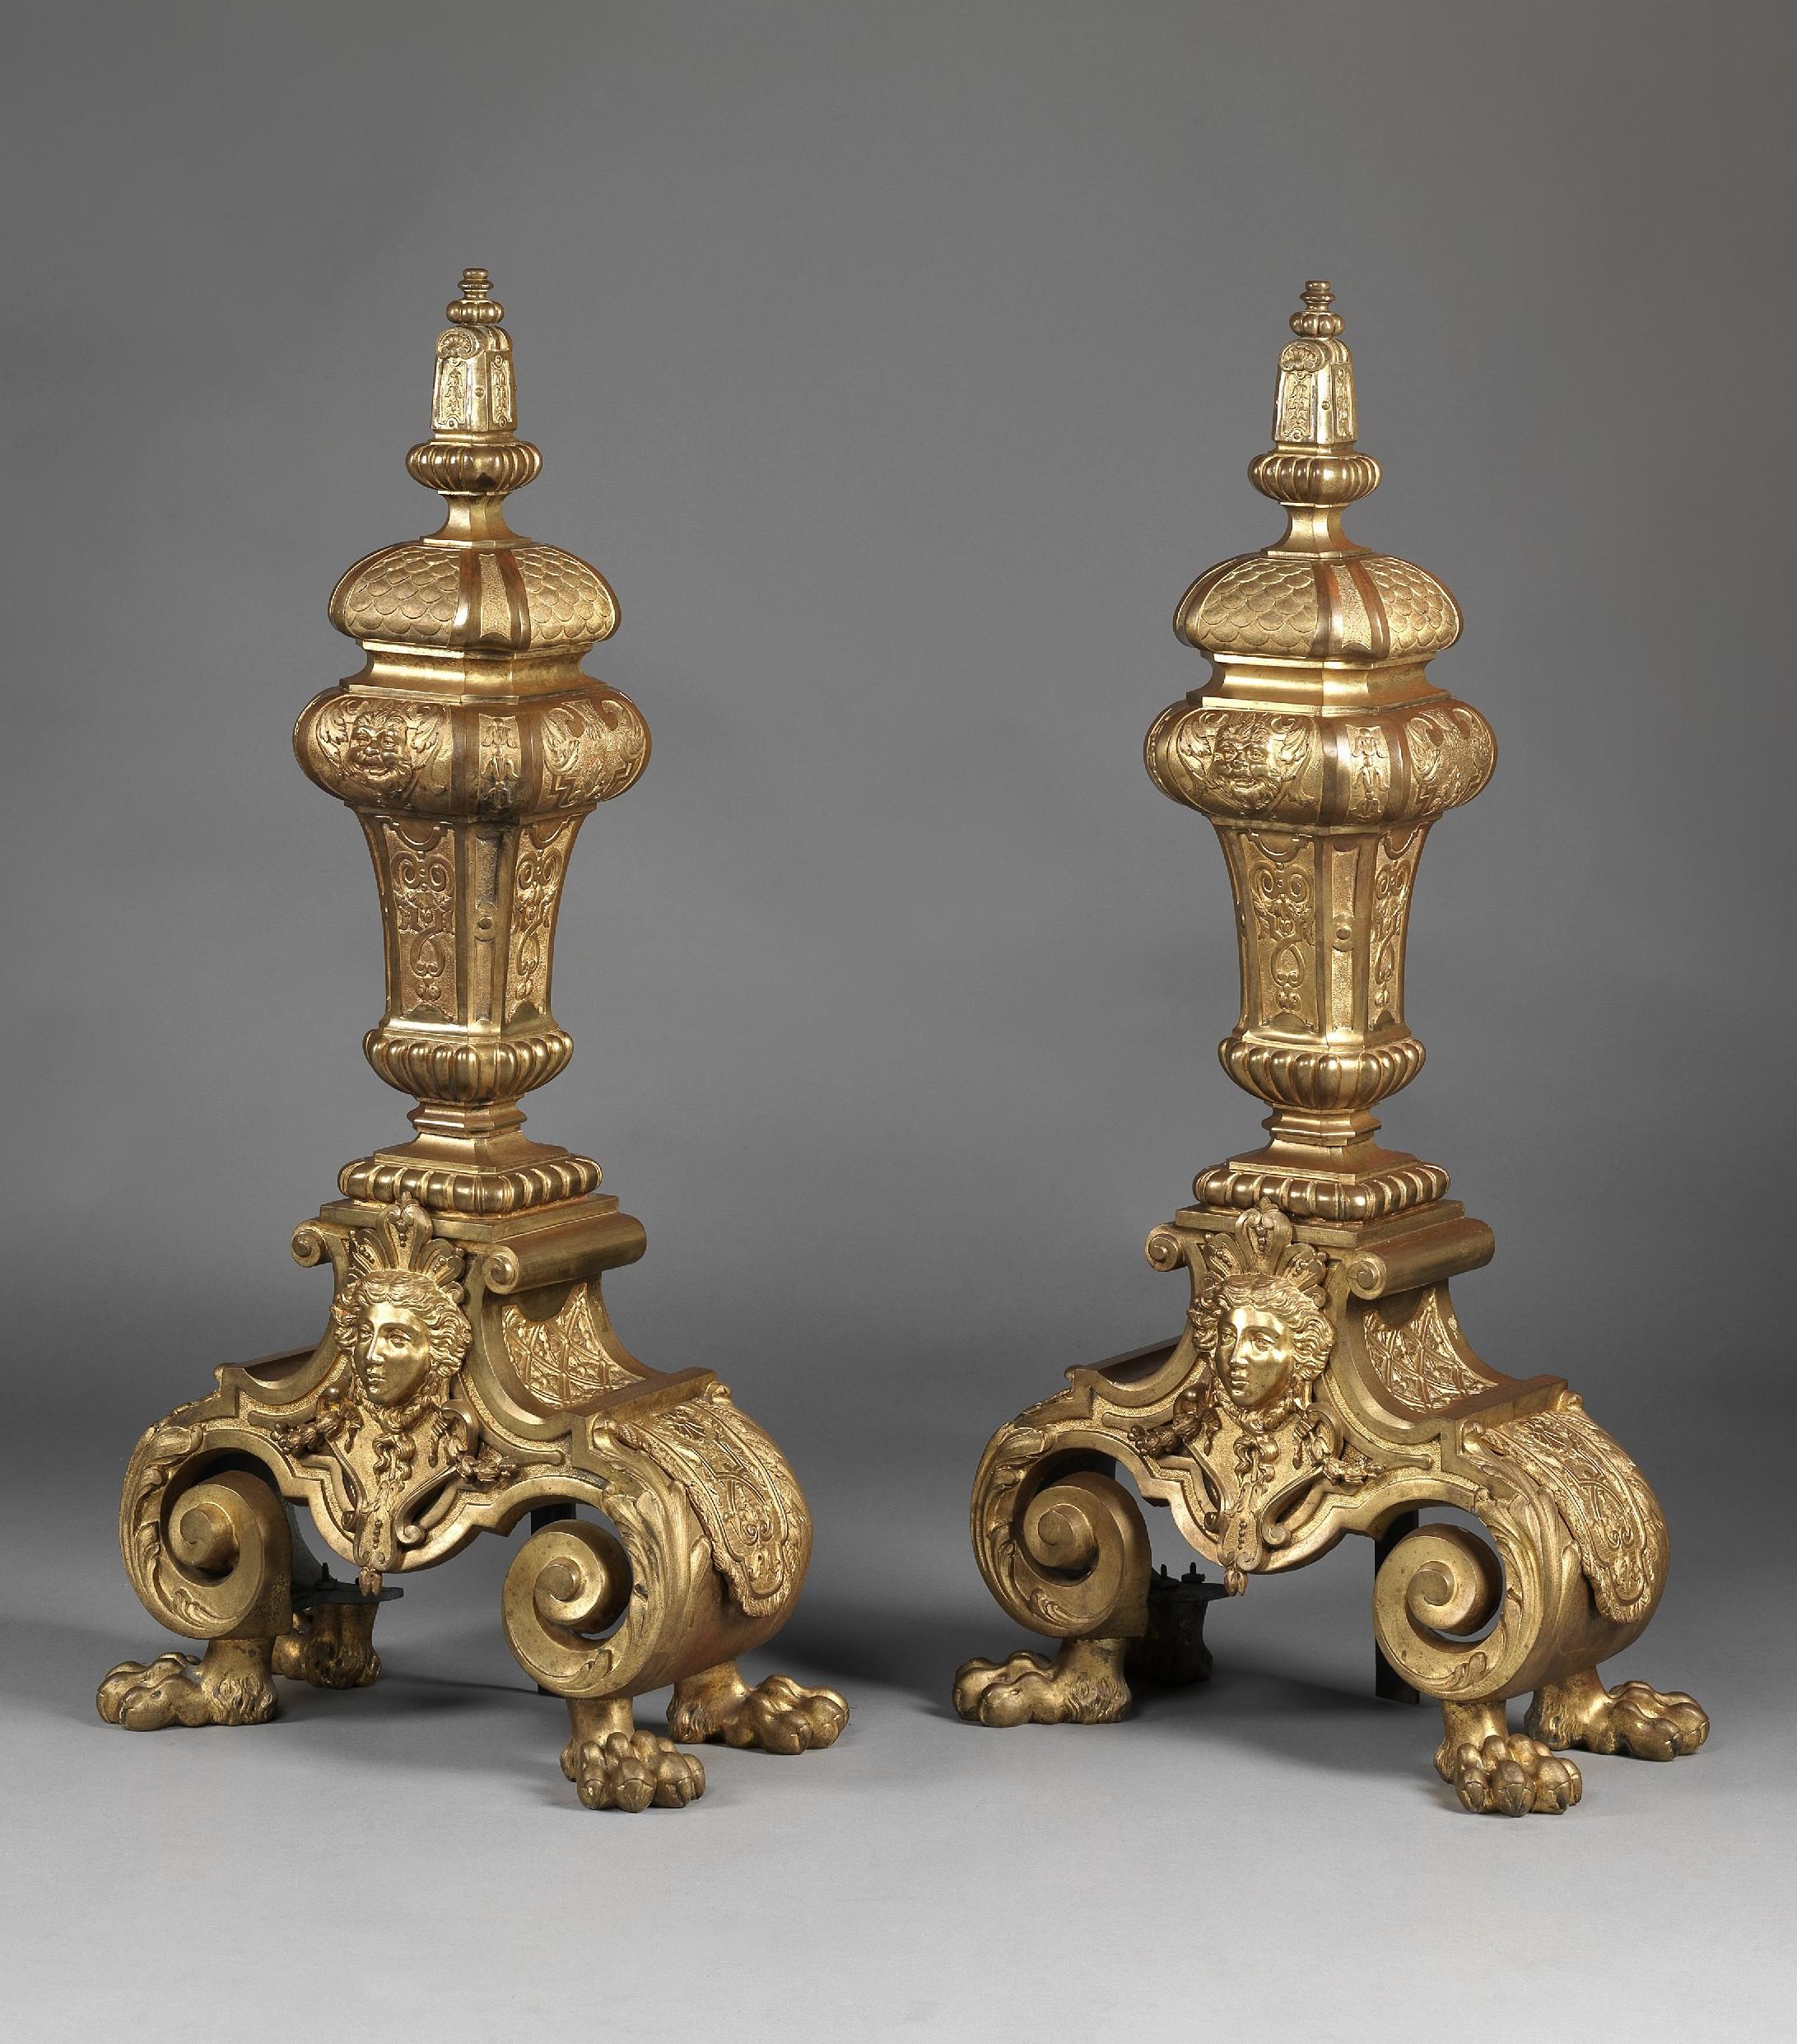 Régence Pair of Exceptionally Large Regence Style Gilt-Bronze Chenets, circa 1860 For Sale